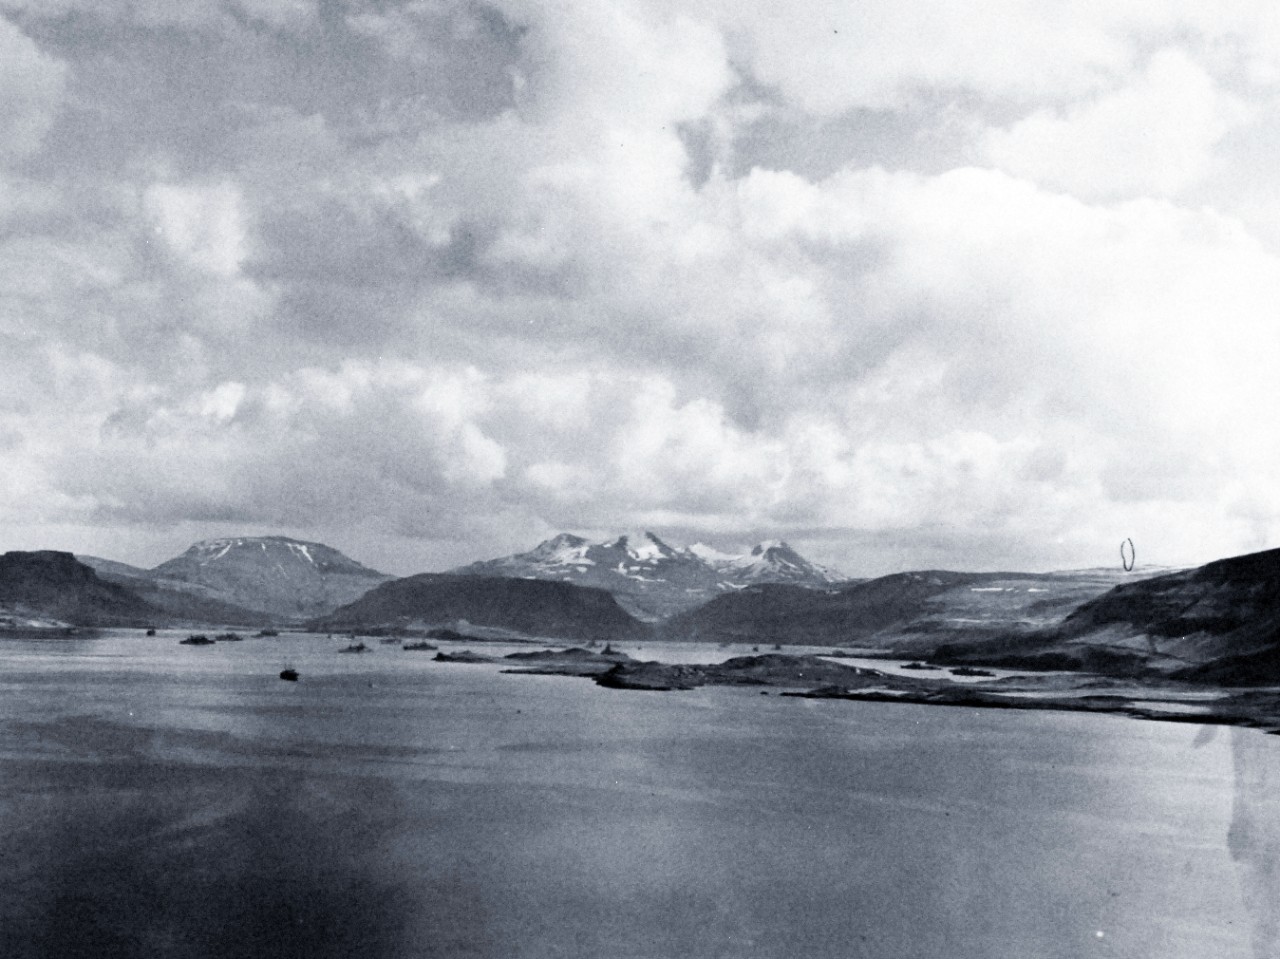 <p>80-G-24825: PQ-17 Arctic Convoy, June-July 1942. The covering forces of the PQ-17 Convoy (British and American ships) at anchor in the harbor at Hvalfjord, Iceland, May 1942.&nbsp;</p>
